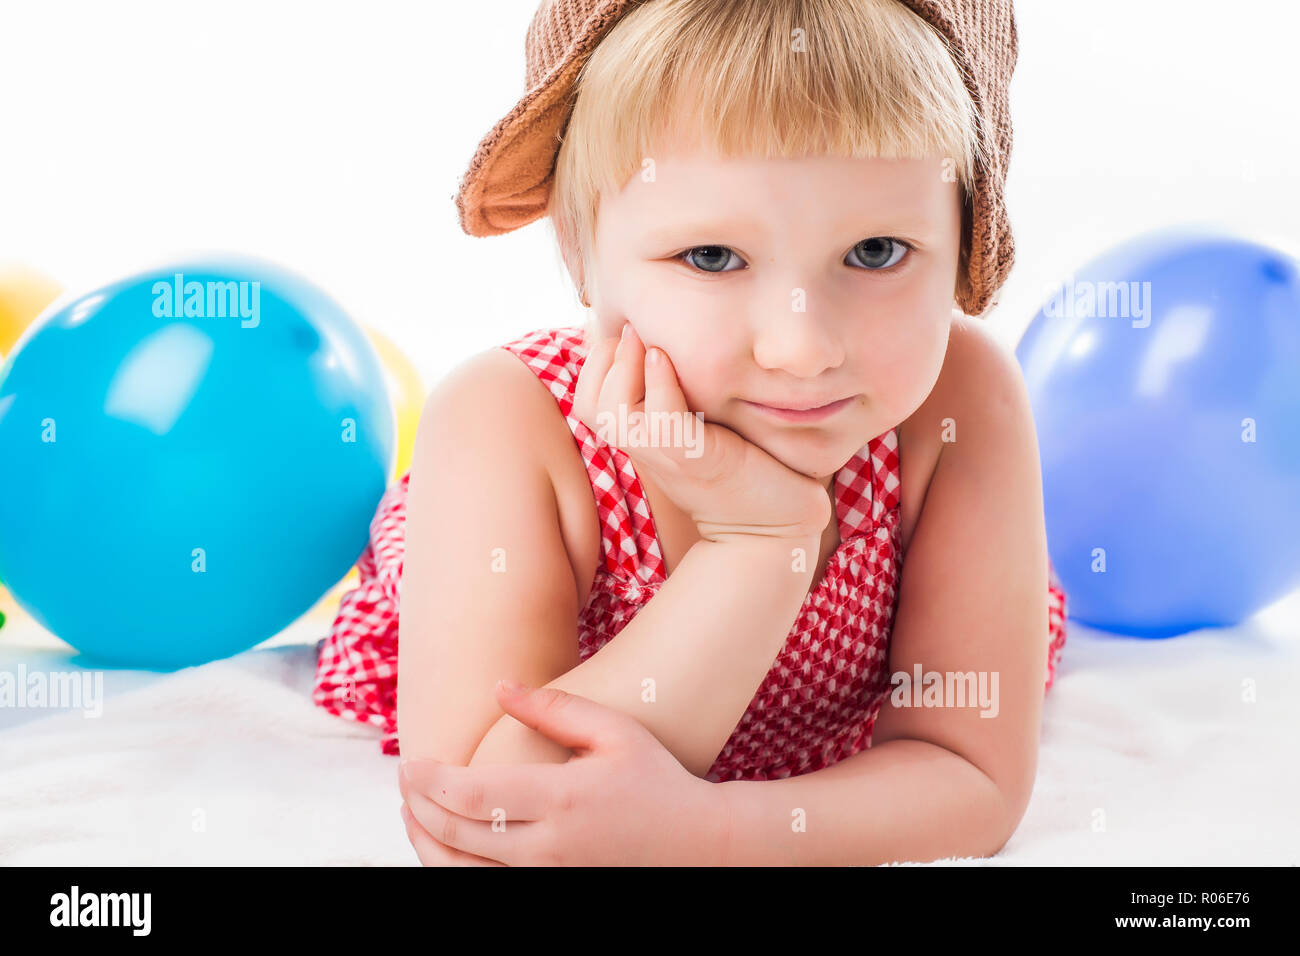 Cute Girl being serious and pensive Stock Photo